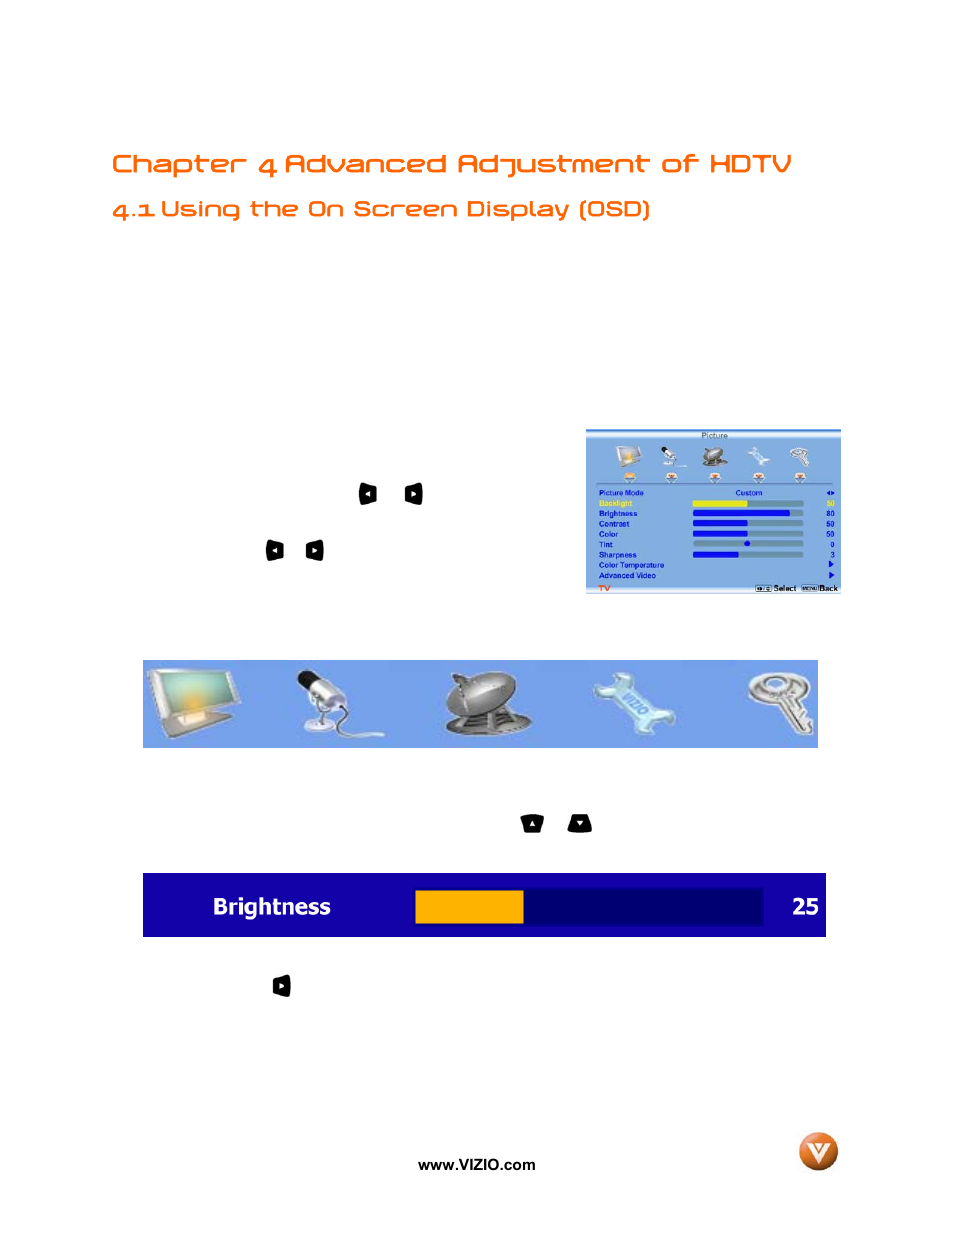 Chapter 4 advanced adjustment of hdtv, 1 using the on screen display (osd) | Vizio GV46L FHDTV20A User Manual | Page 40 / 85